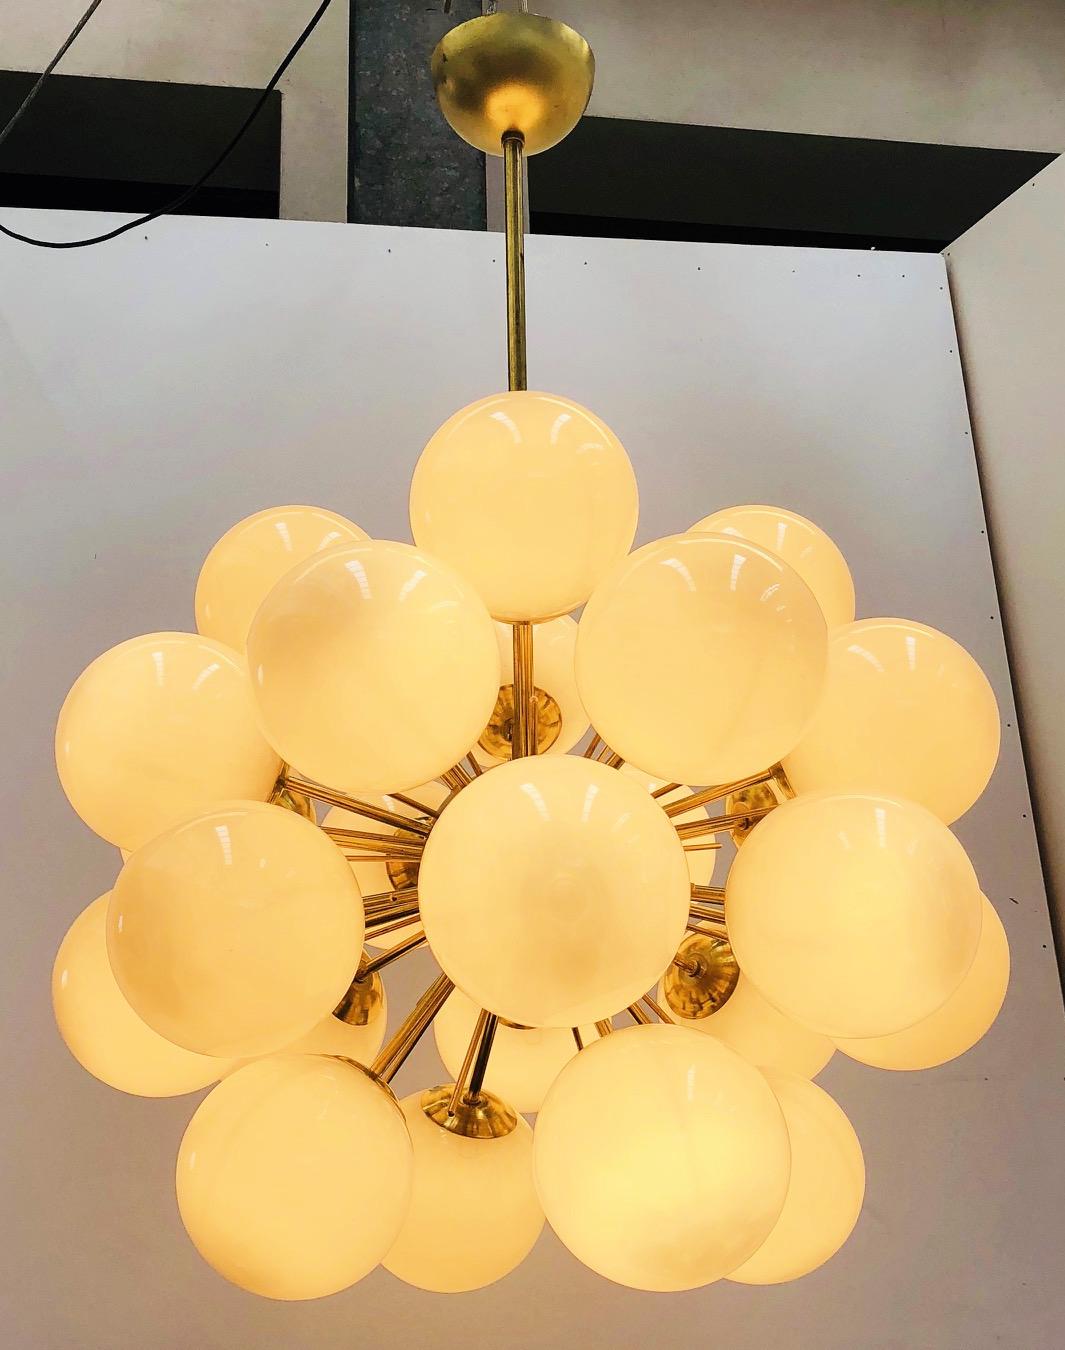 Italian sputnik chandelier with 24 Murano glass globes mounted on brass frame / Designed by Fabio Bergomi for Fabio Ltd / Made in Italy
24 lights / E12 or E14 type / max 40W each
Diameter: 28 inches / Height: 39 inches including rod and canopy
Order